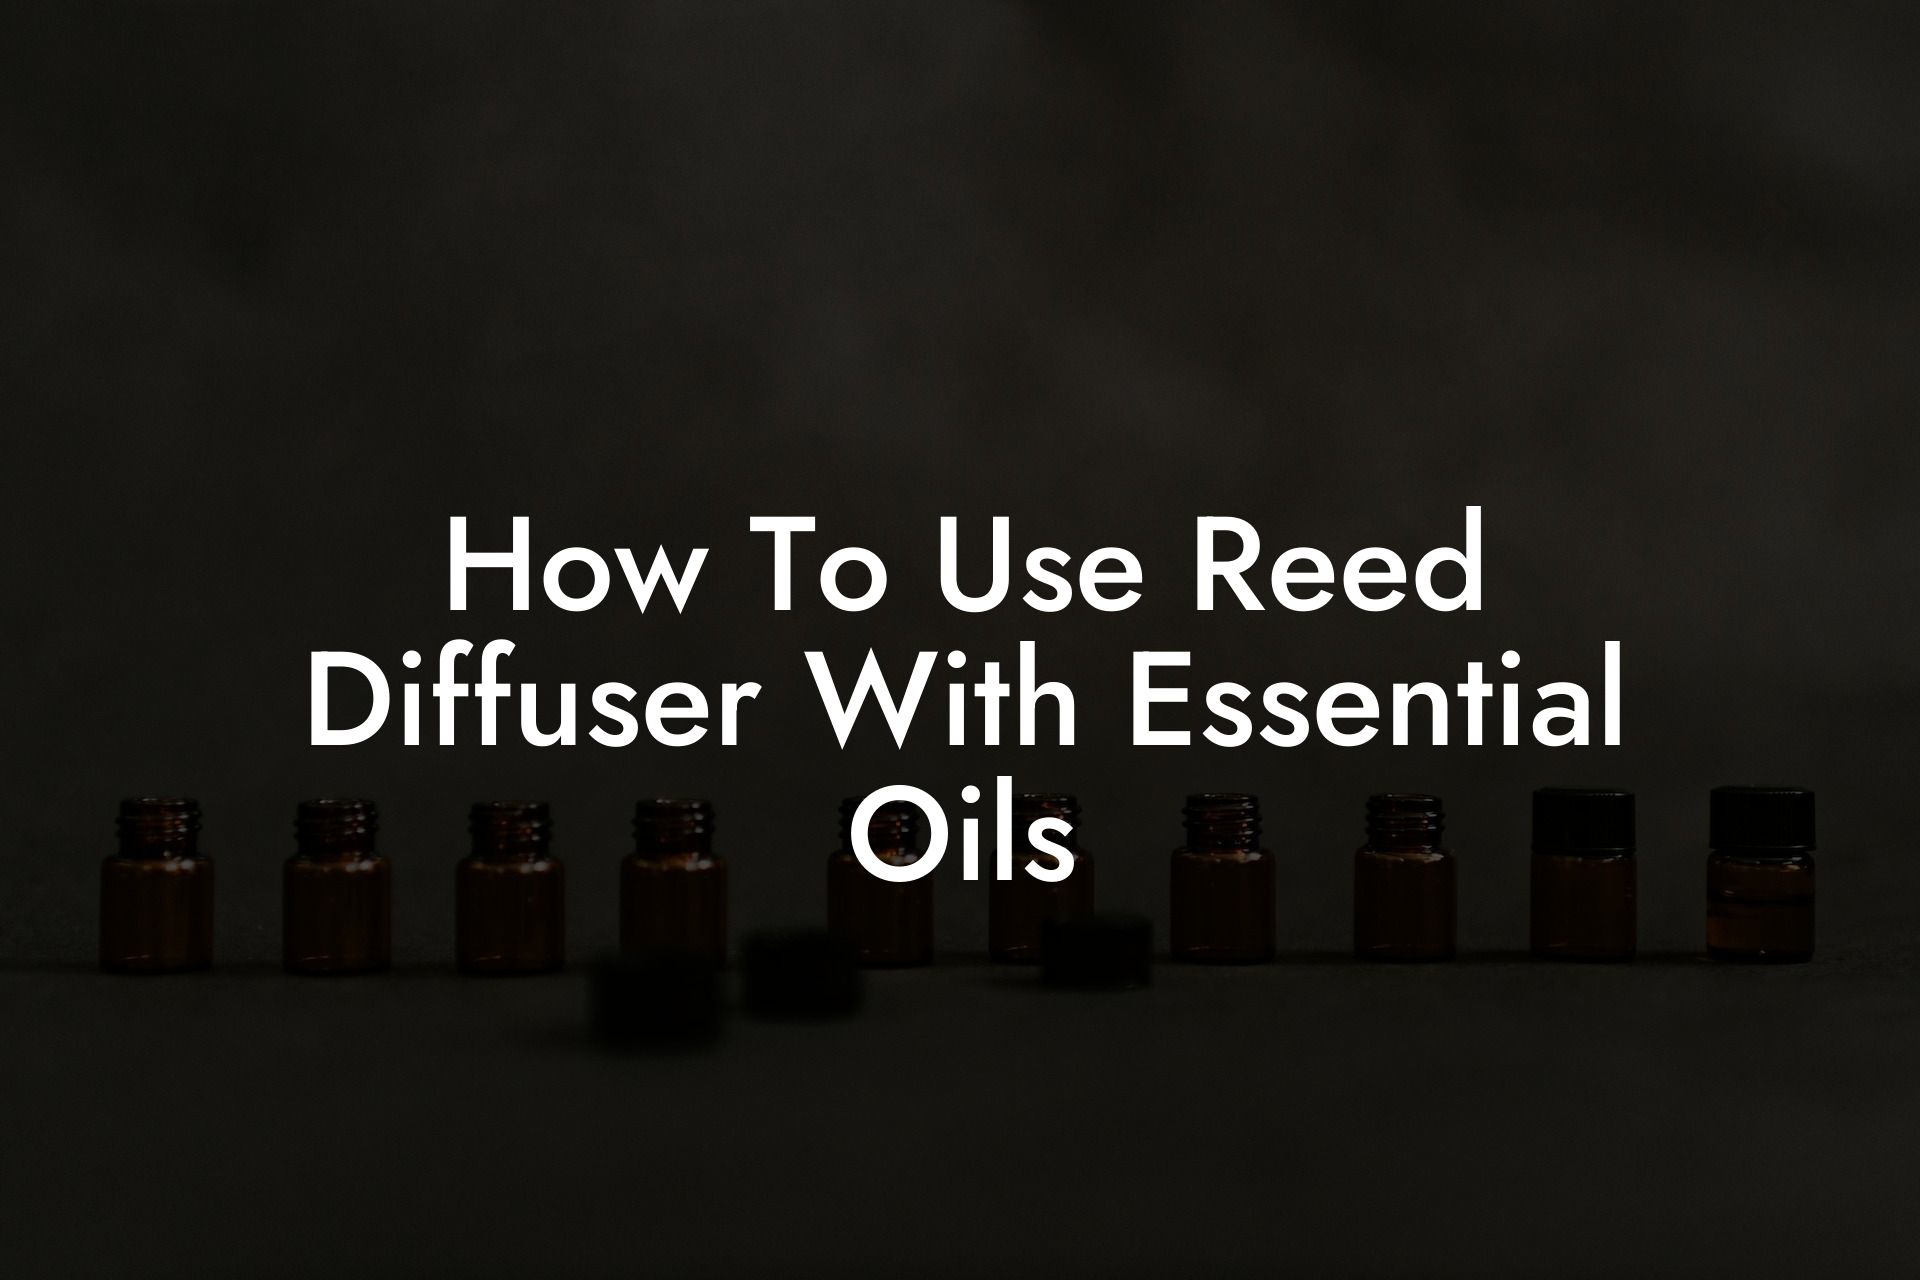 How To Use Reed Diffuser With Essential Oils